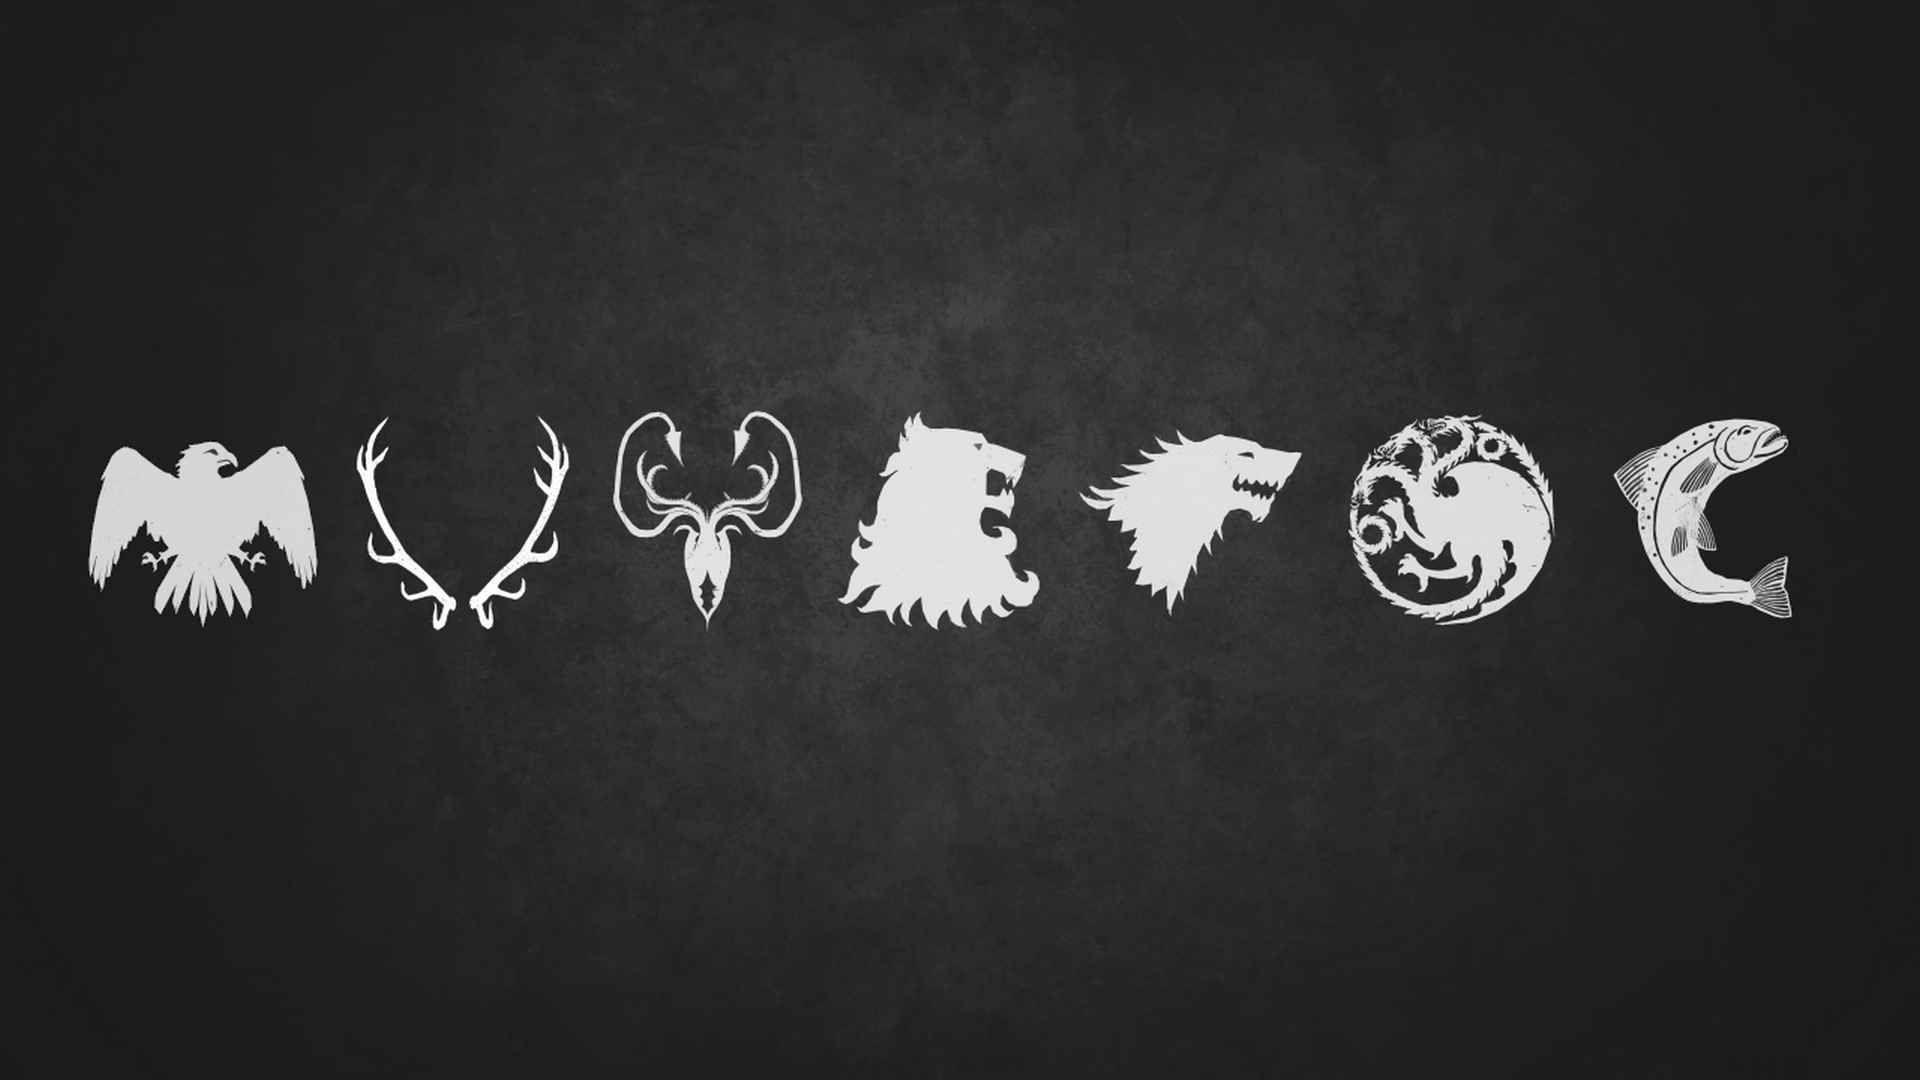 Game Of Thrones Wallpaper, Wallpaper and Picture Gallery